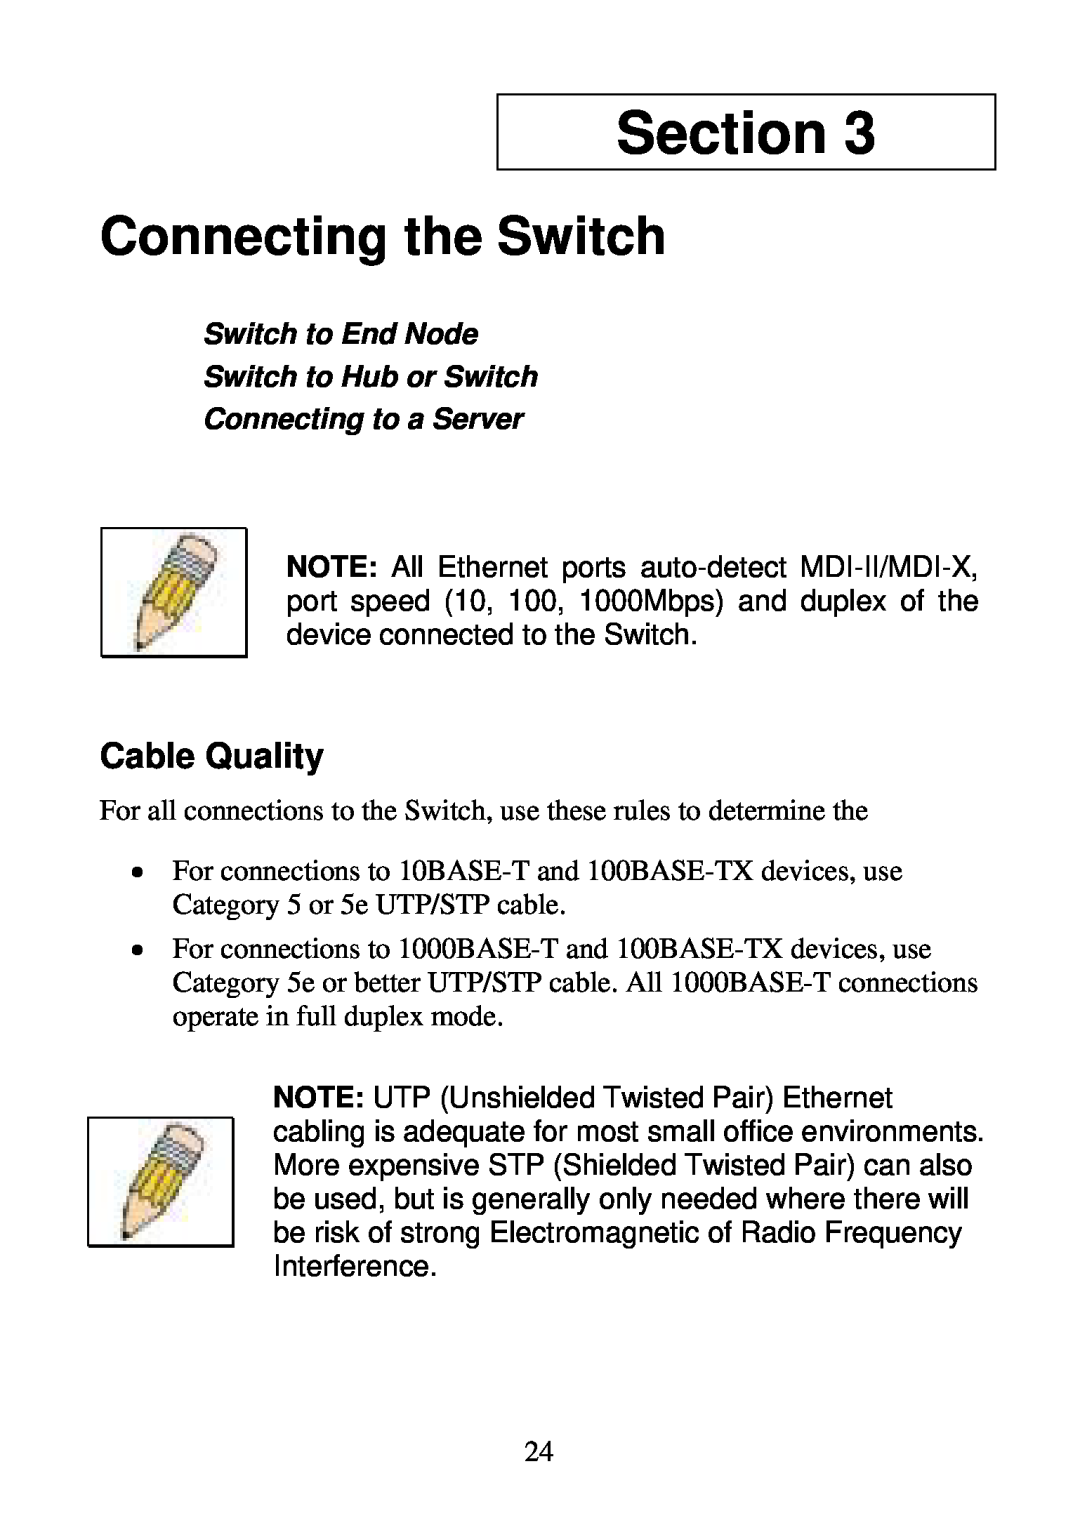 D-Link DGS-1024D, DGS-1016D manual Section, Connecting the Switch, Cable Quality 